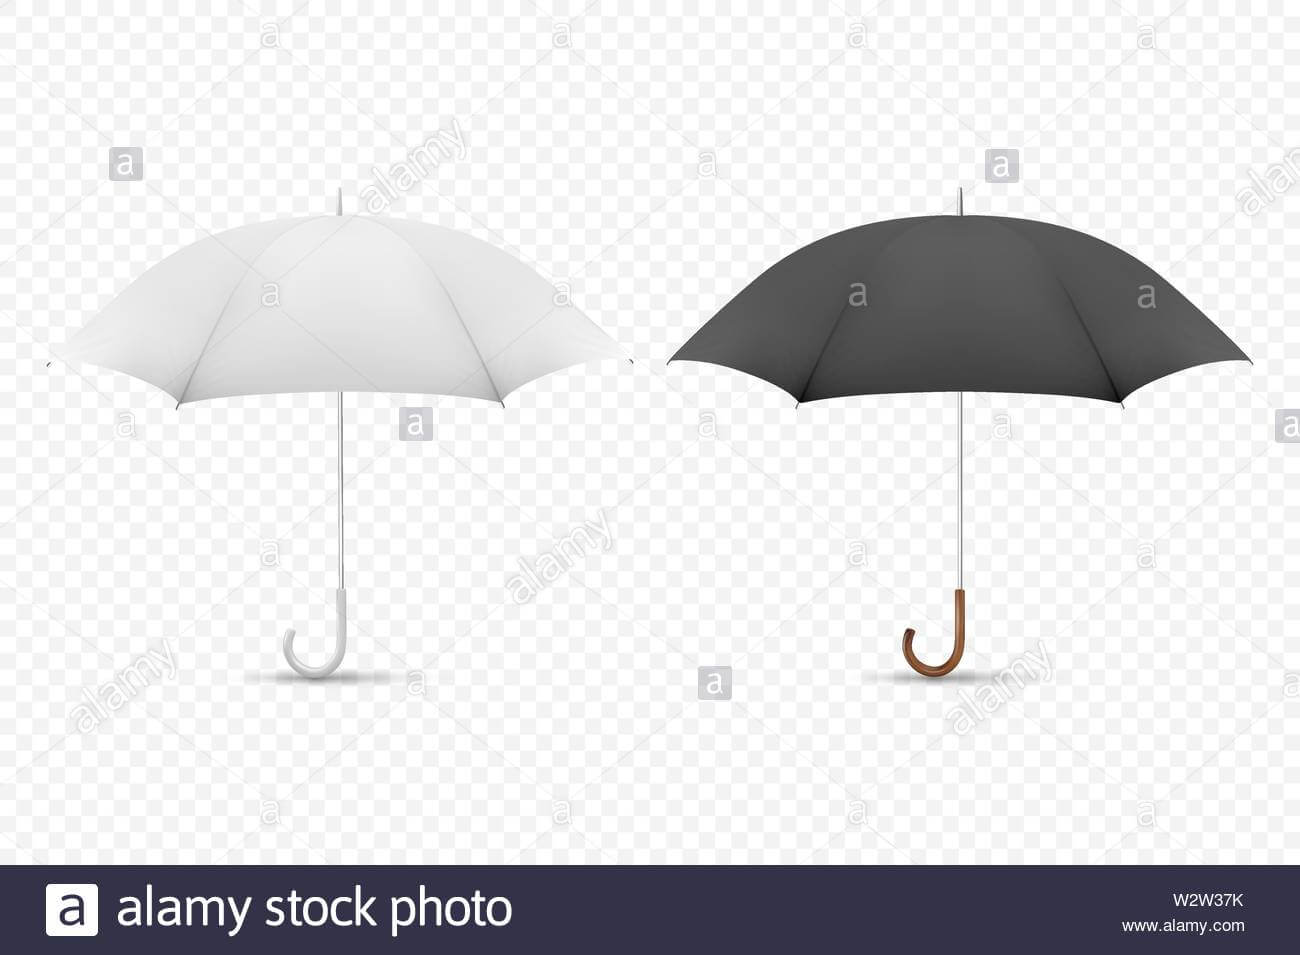 Vector 3D Realistic Render White And Black Blank Umbrella With Blank Umbrella Template